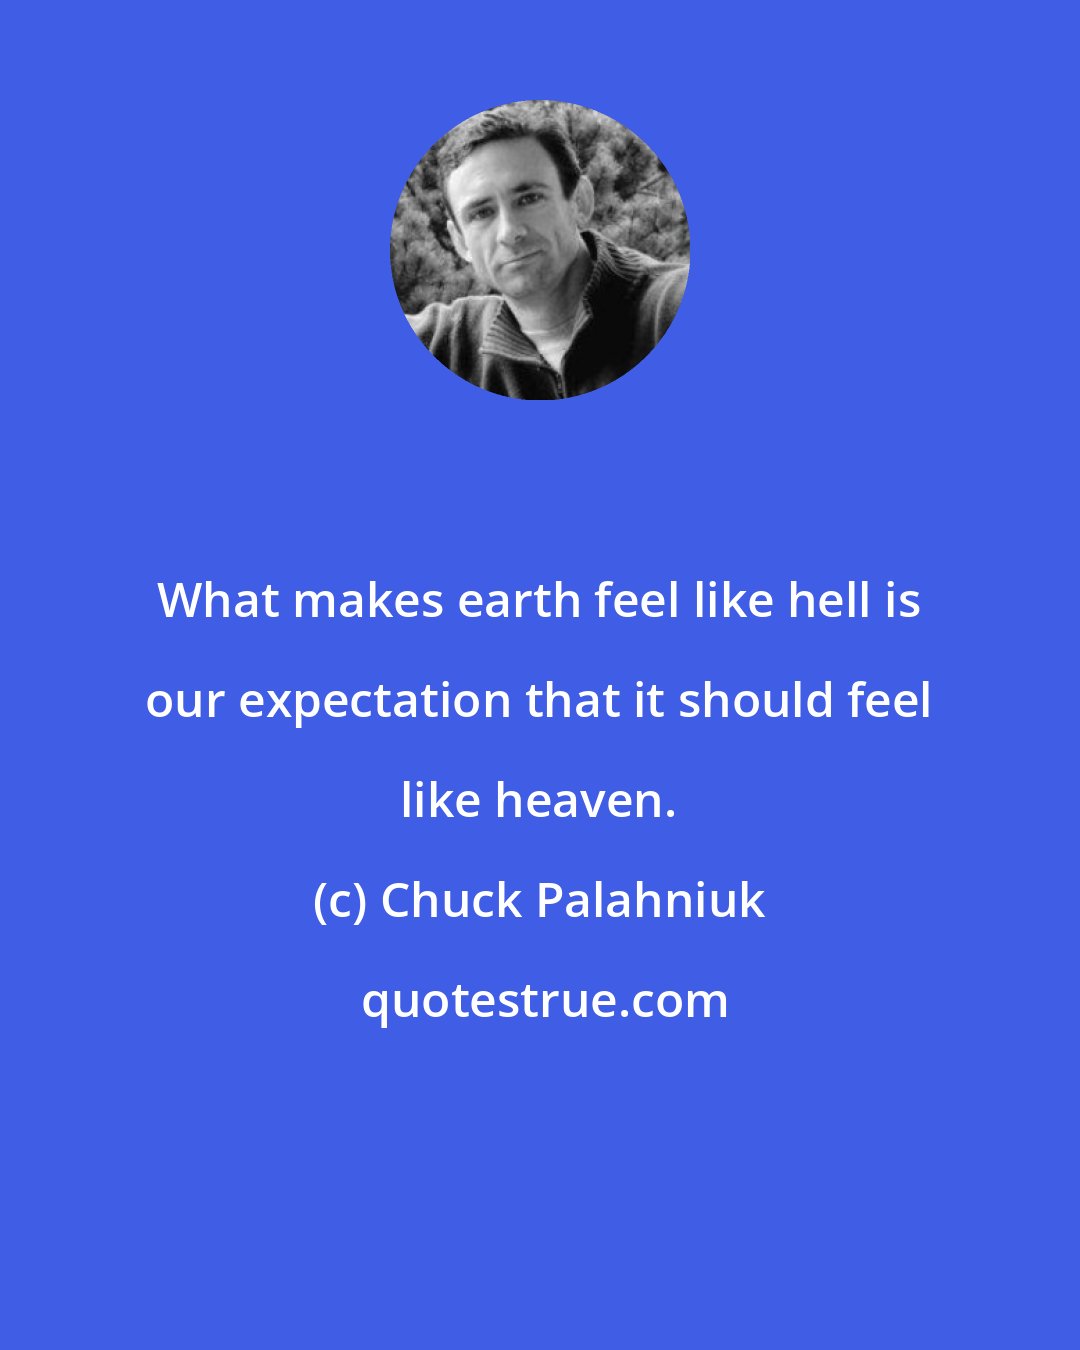 Chuck Palahniuk: What makes earth feel like hell is our expectation that it should feel like heaven.